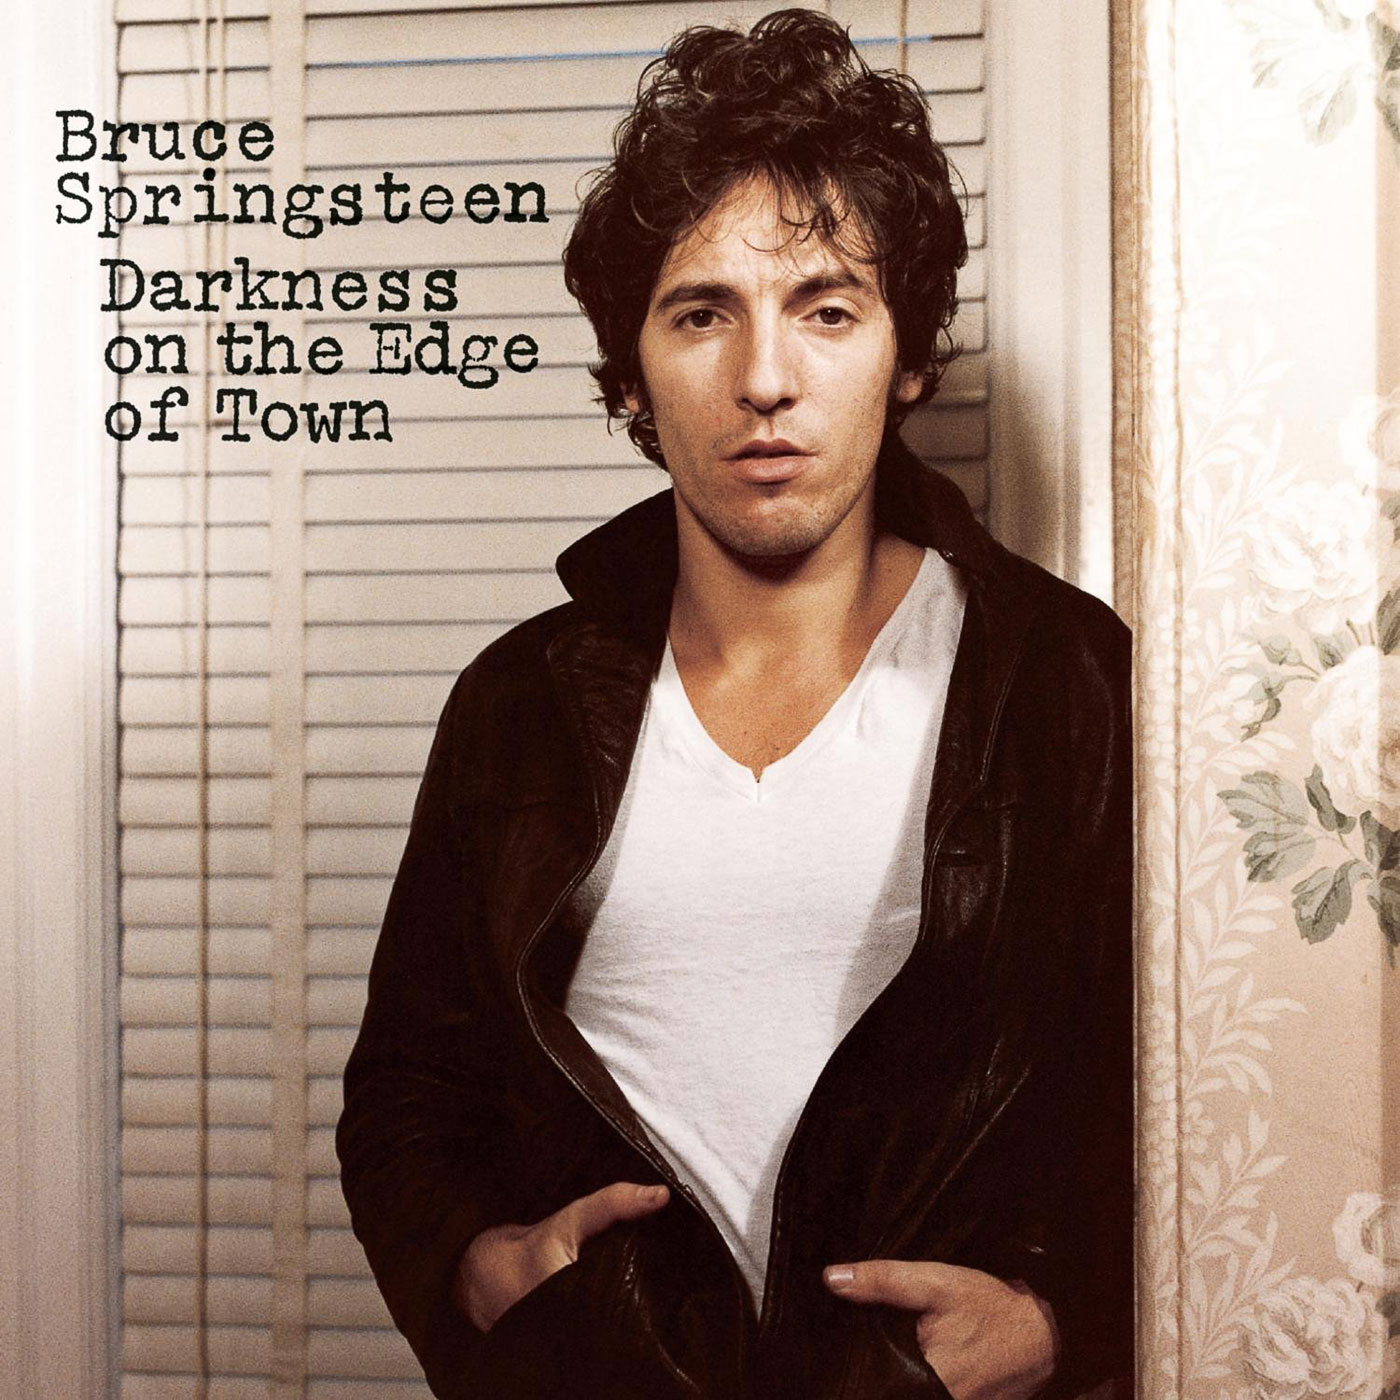 409 Bruce Springsteen – Darkness on the Edge of Town